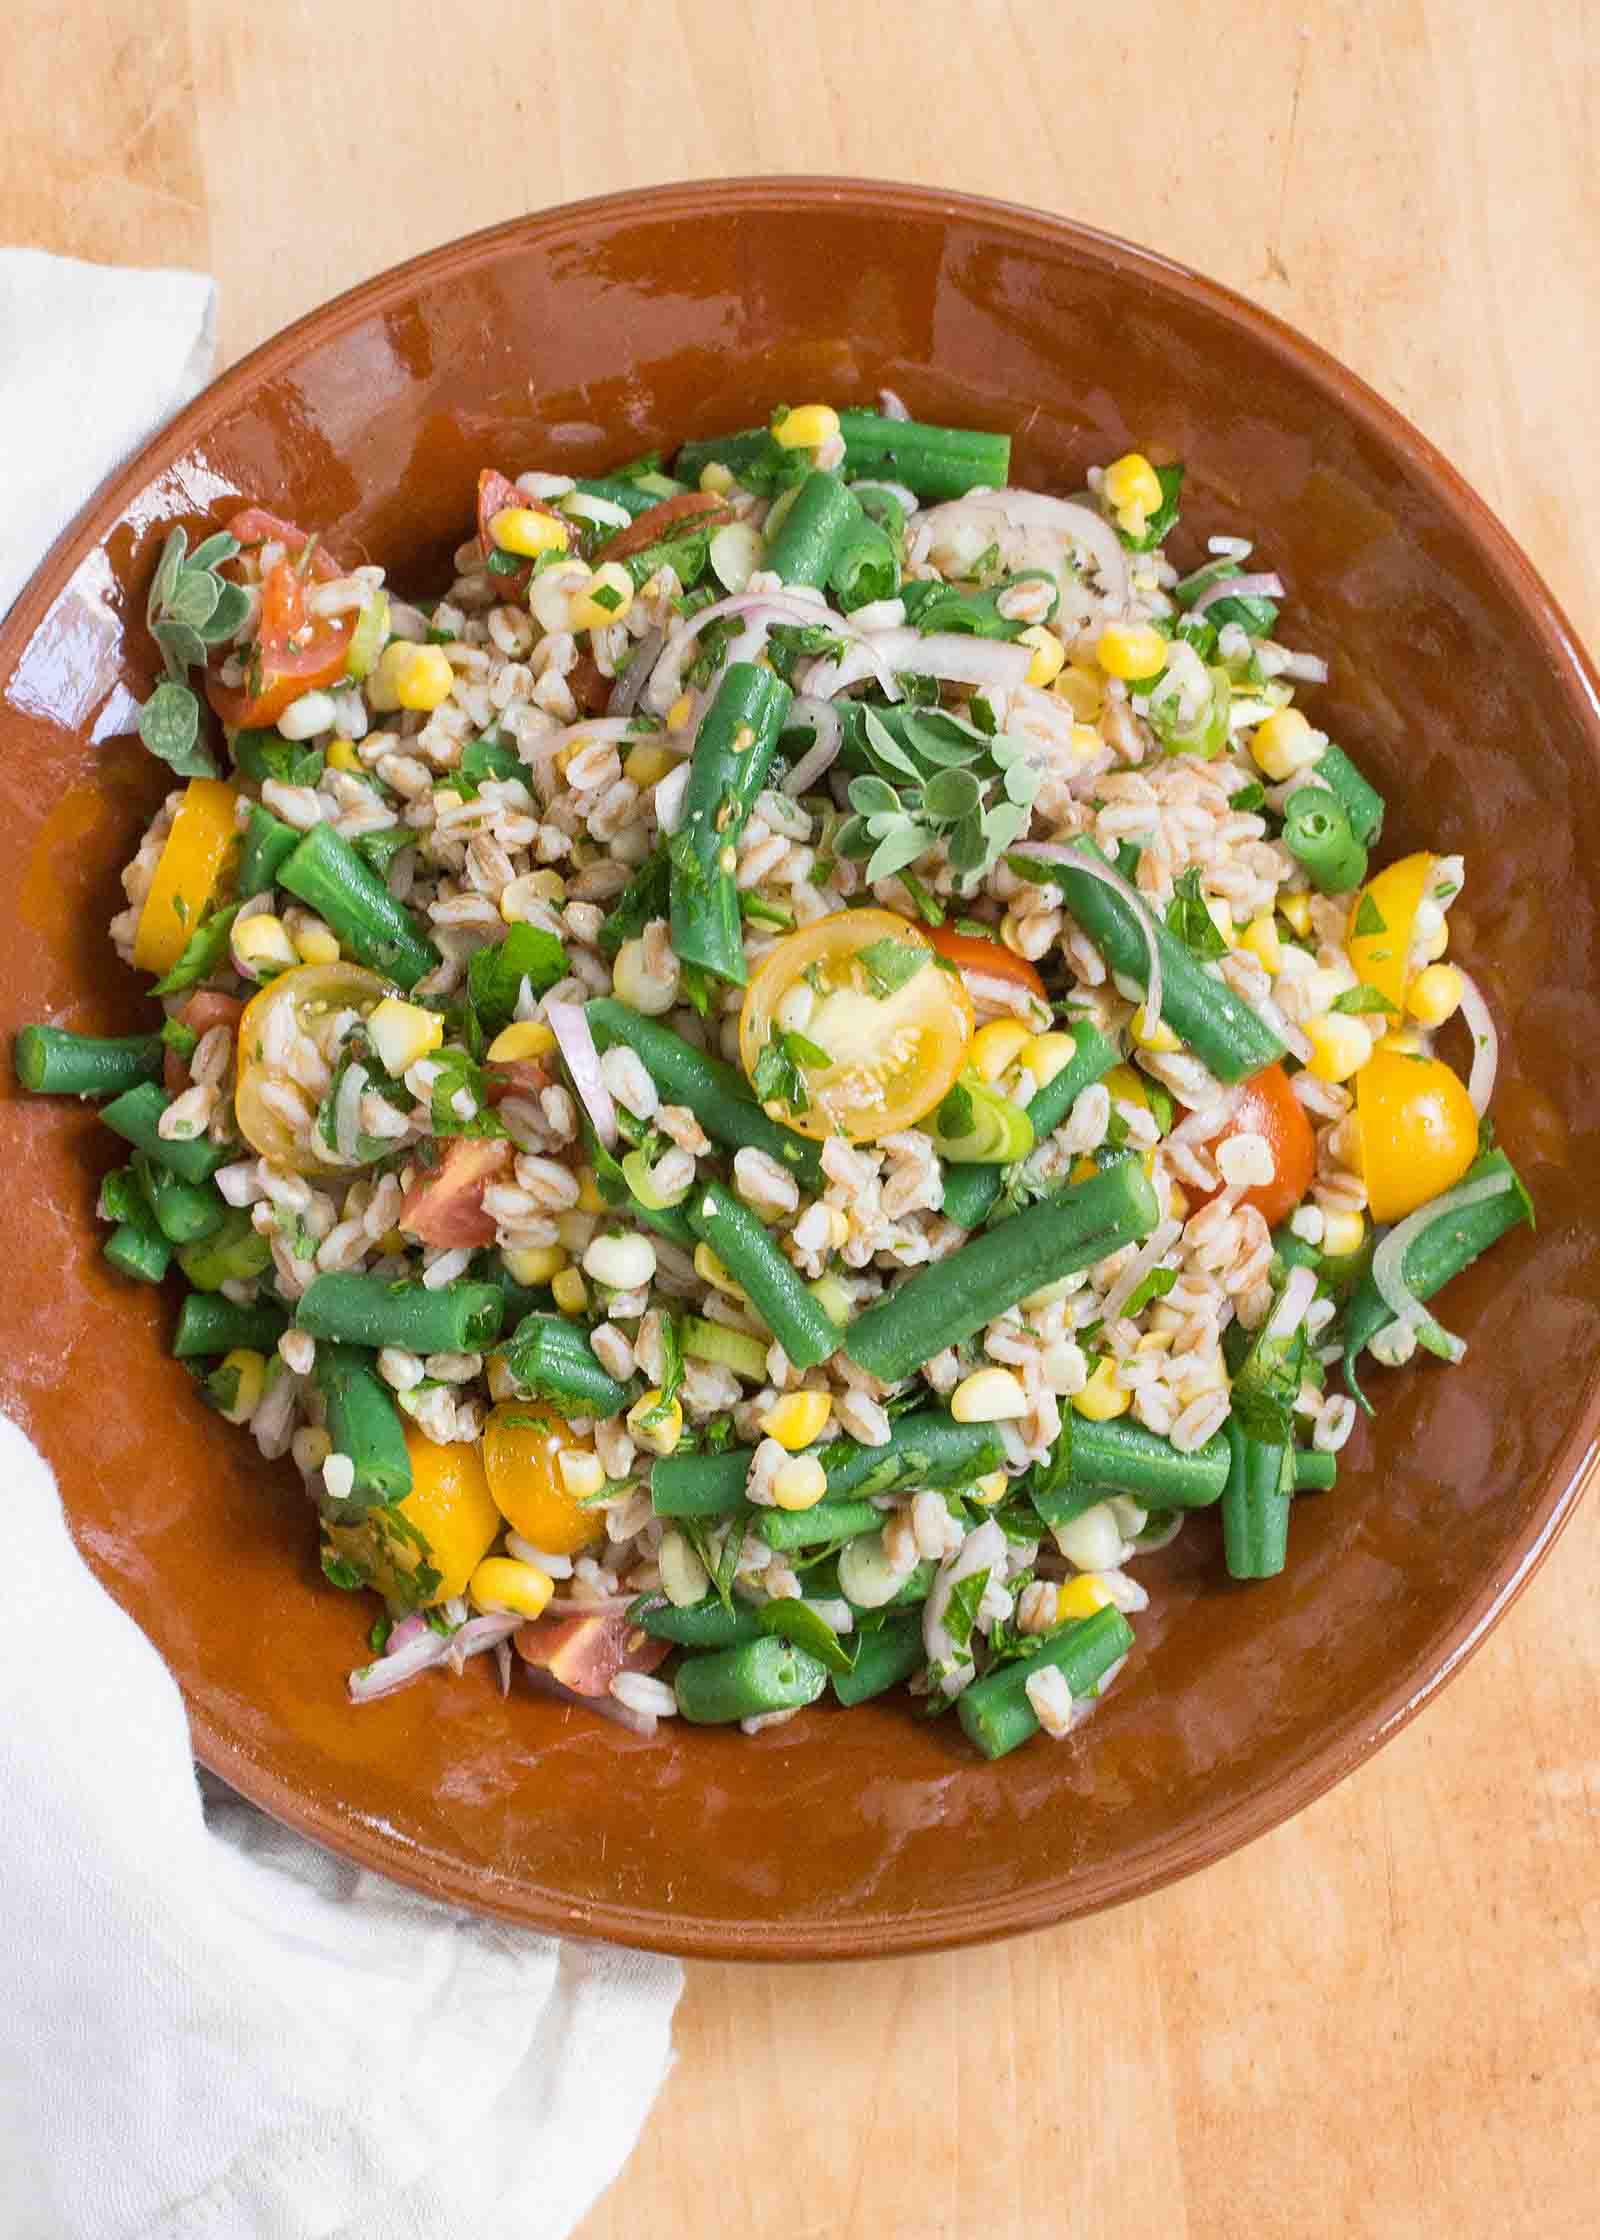 Farro Salad with Green Beans, Corn, and Cherry Tomatoes